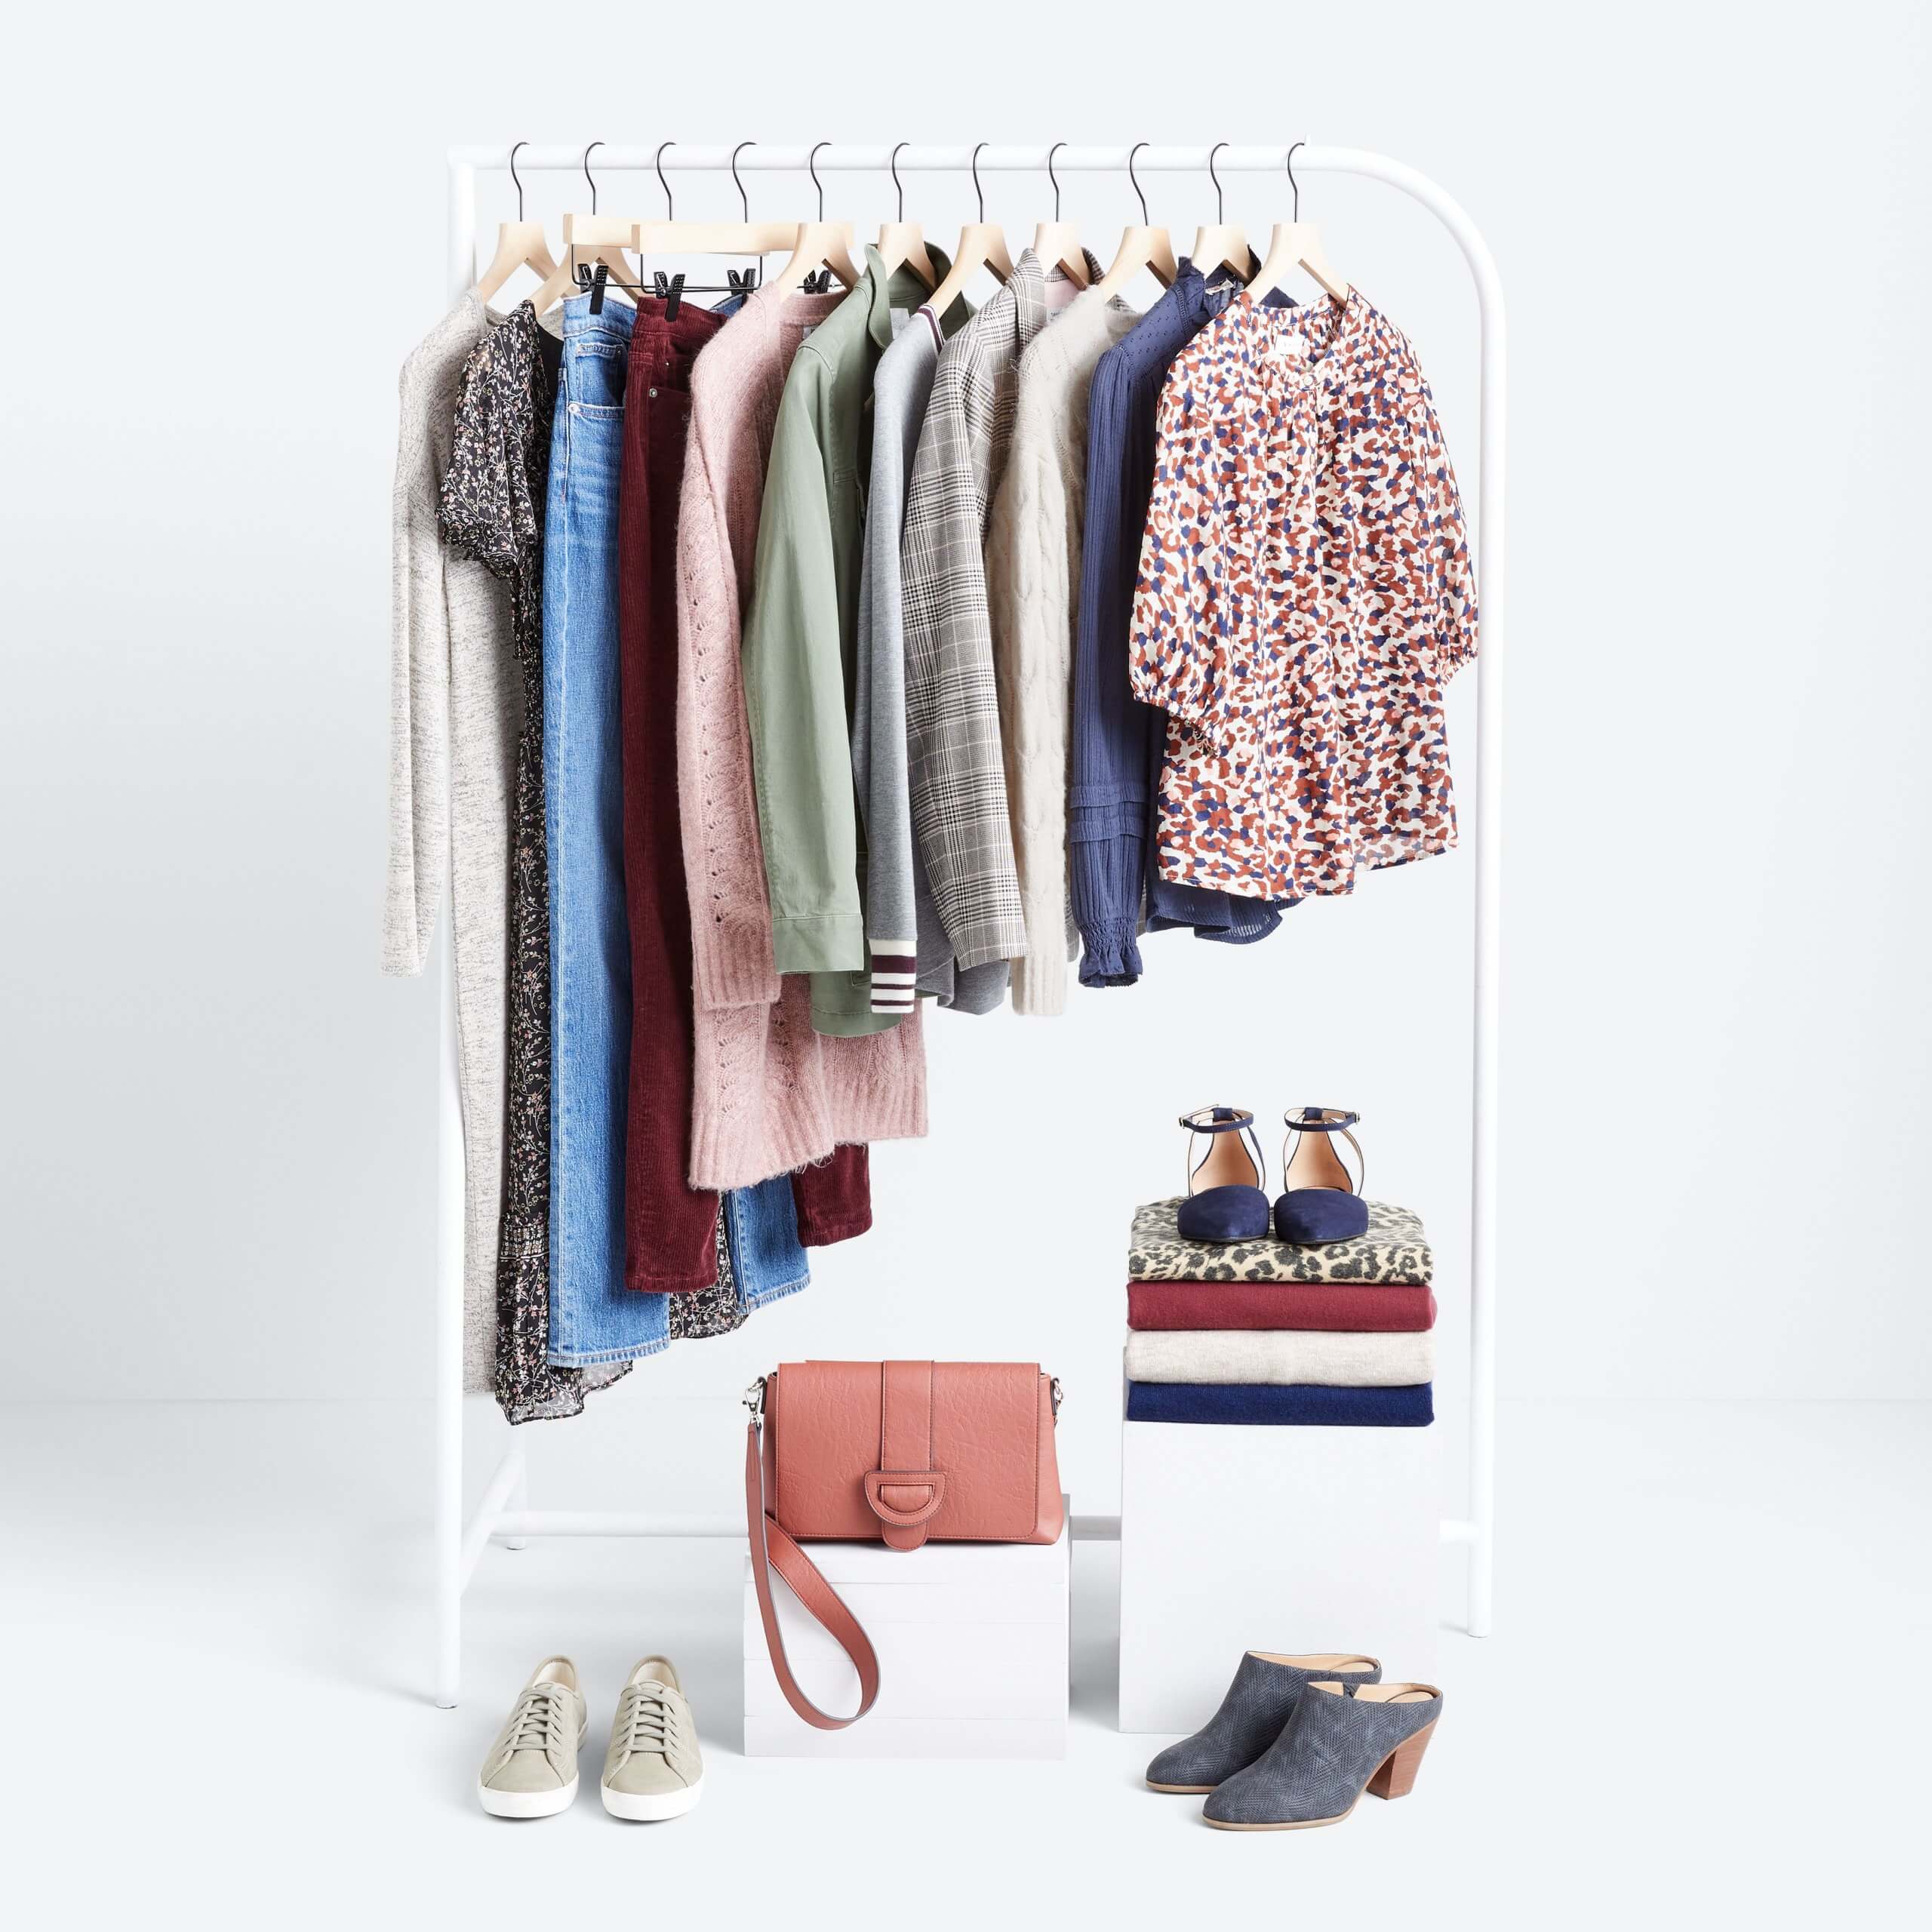 Stitch Fix Women’s rack image featuring red, wnite and blue printed blouse, navy blouse, cream pullover, plaid blazer, grey pullover, green jacket, pink cardigan, burgundy jeans, blue jeans and black printed dress hanging on white rack with tan sneakers and navy mules on the floor, next to pink bag and folded shirts in navy, tan and burgundy, with animal-print flats on white block. 